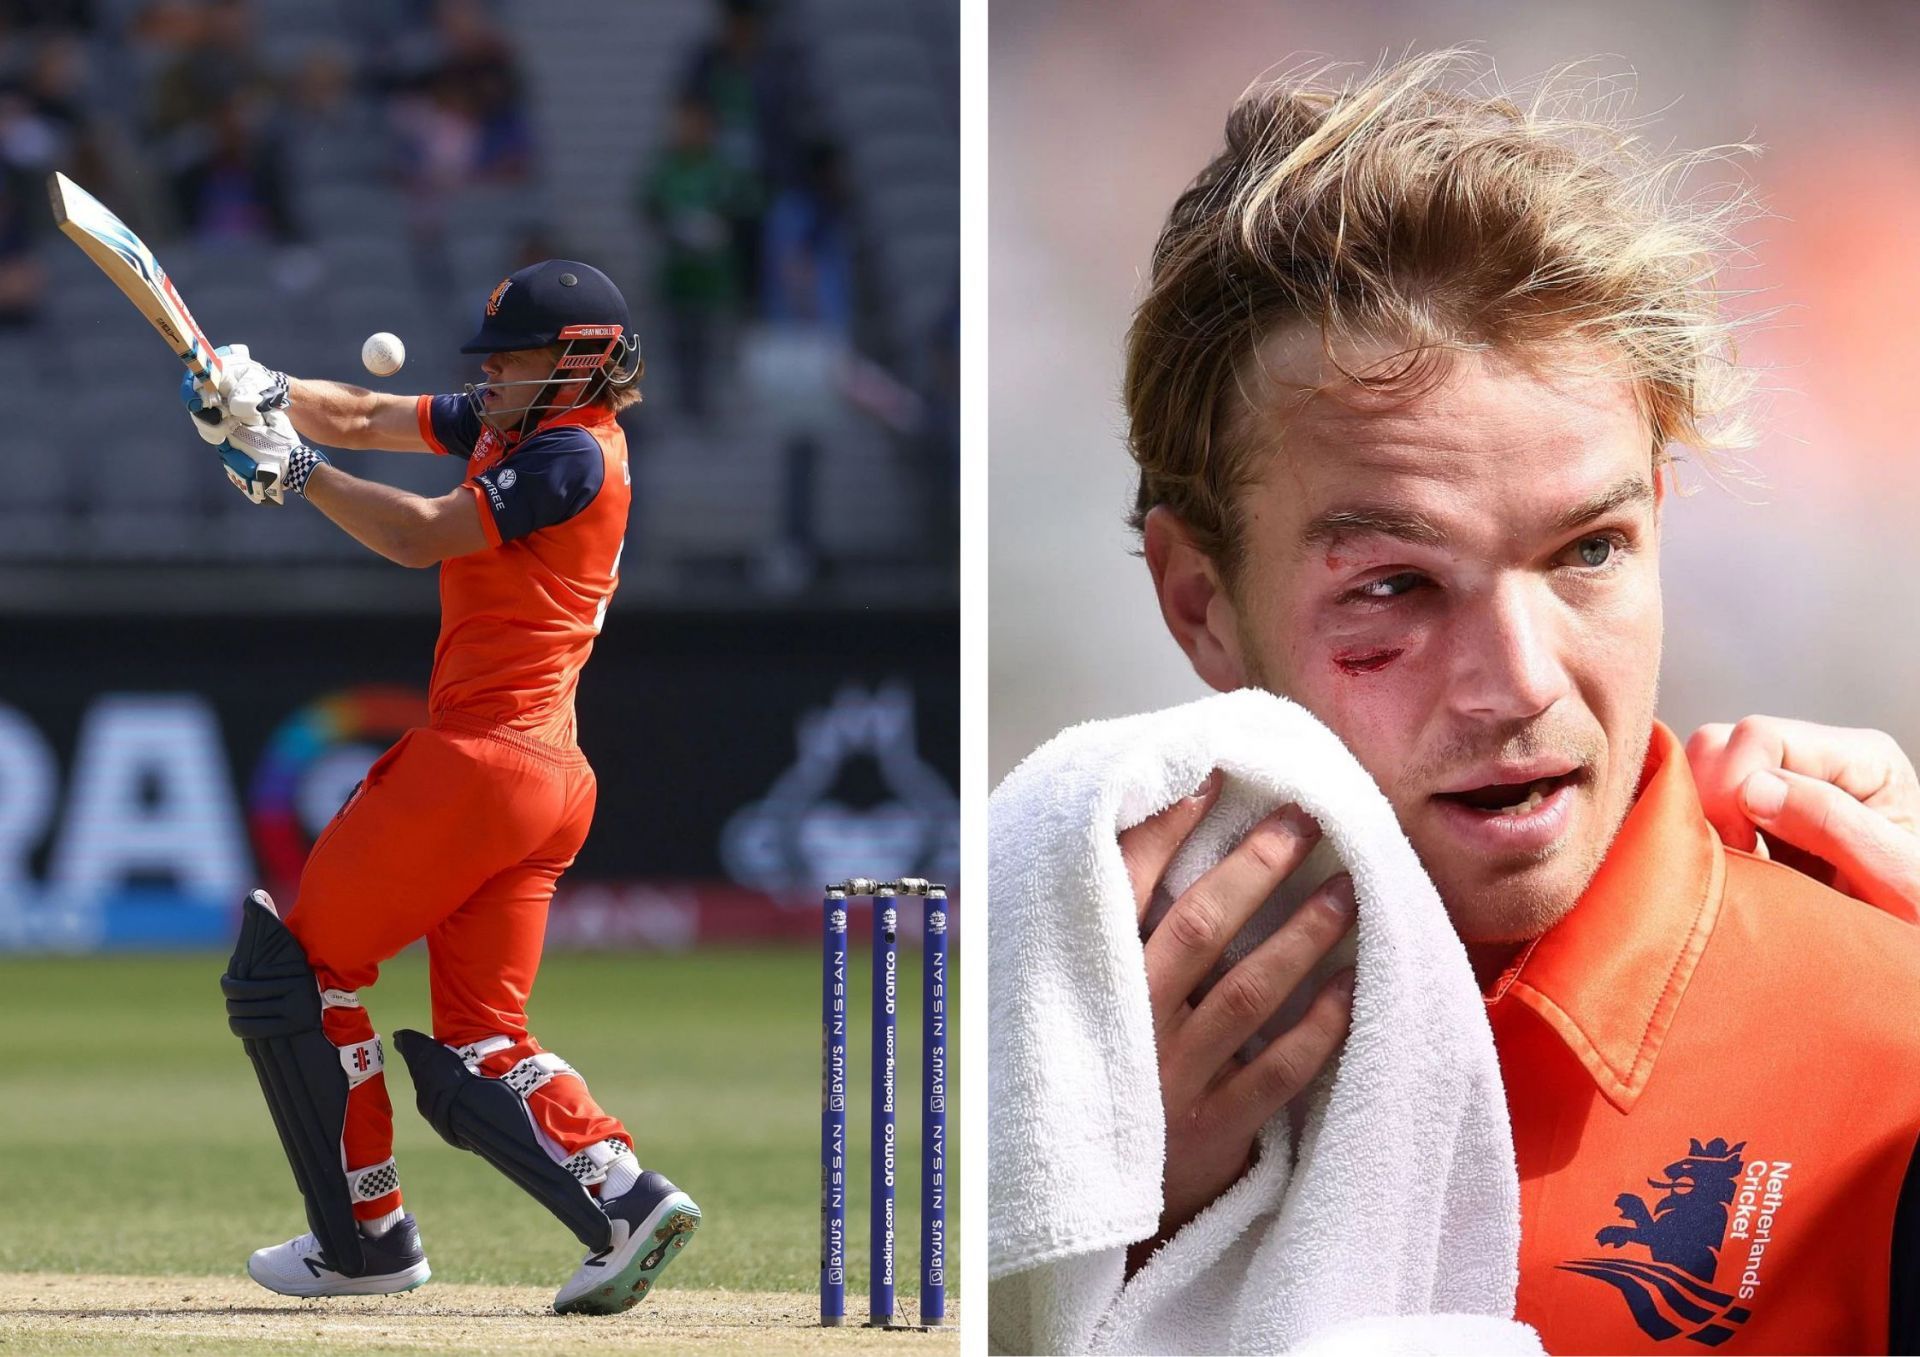 Bas de Leede had to go off the field for treatment to a cut below his right eye as a ferocious Haris Rauf delivery struck him on the grill.